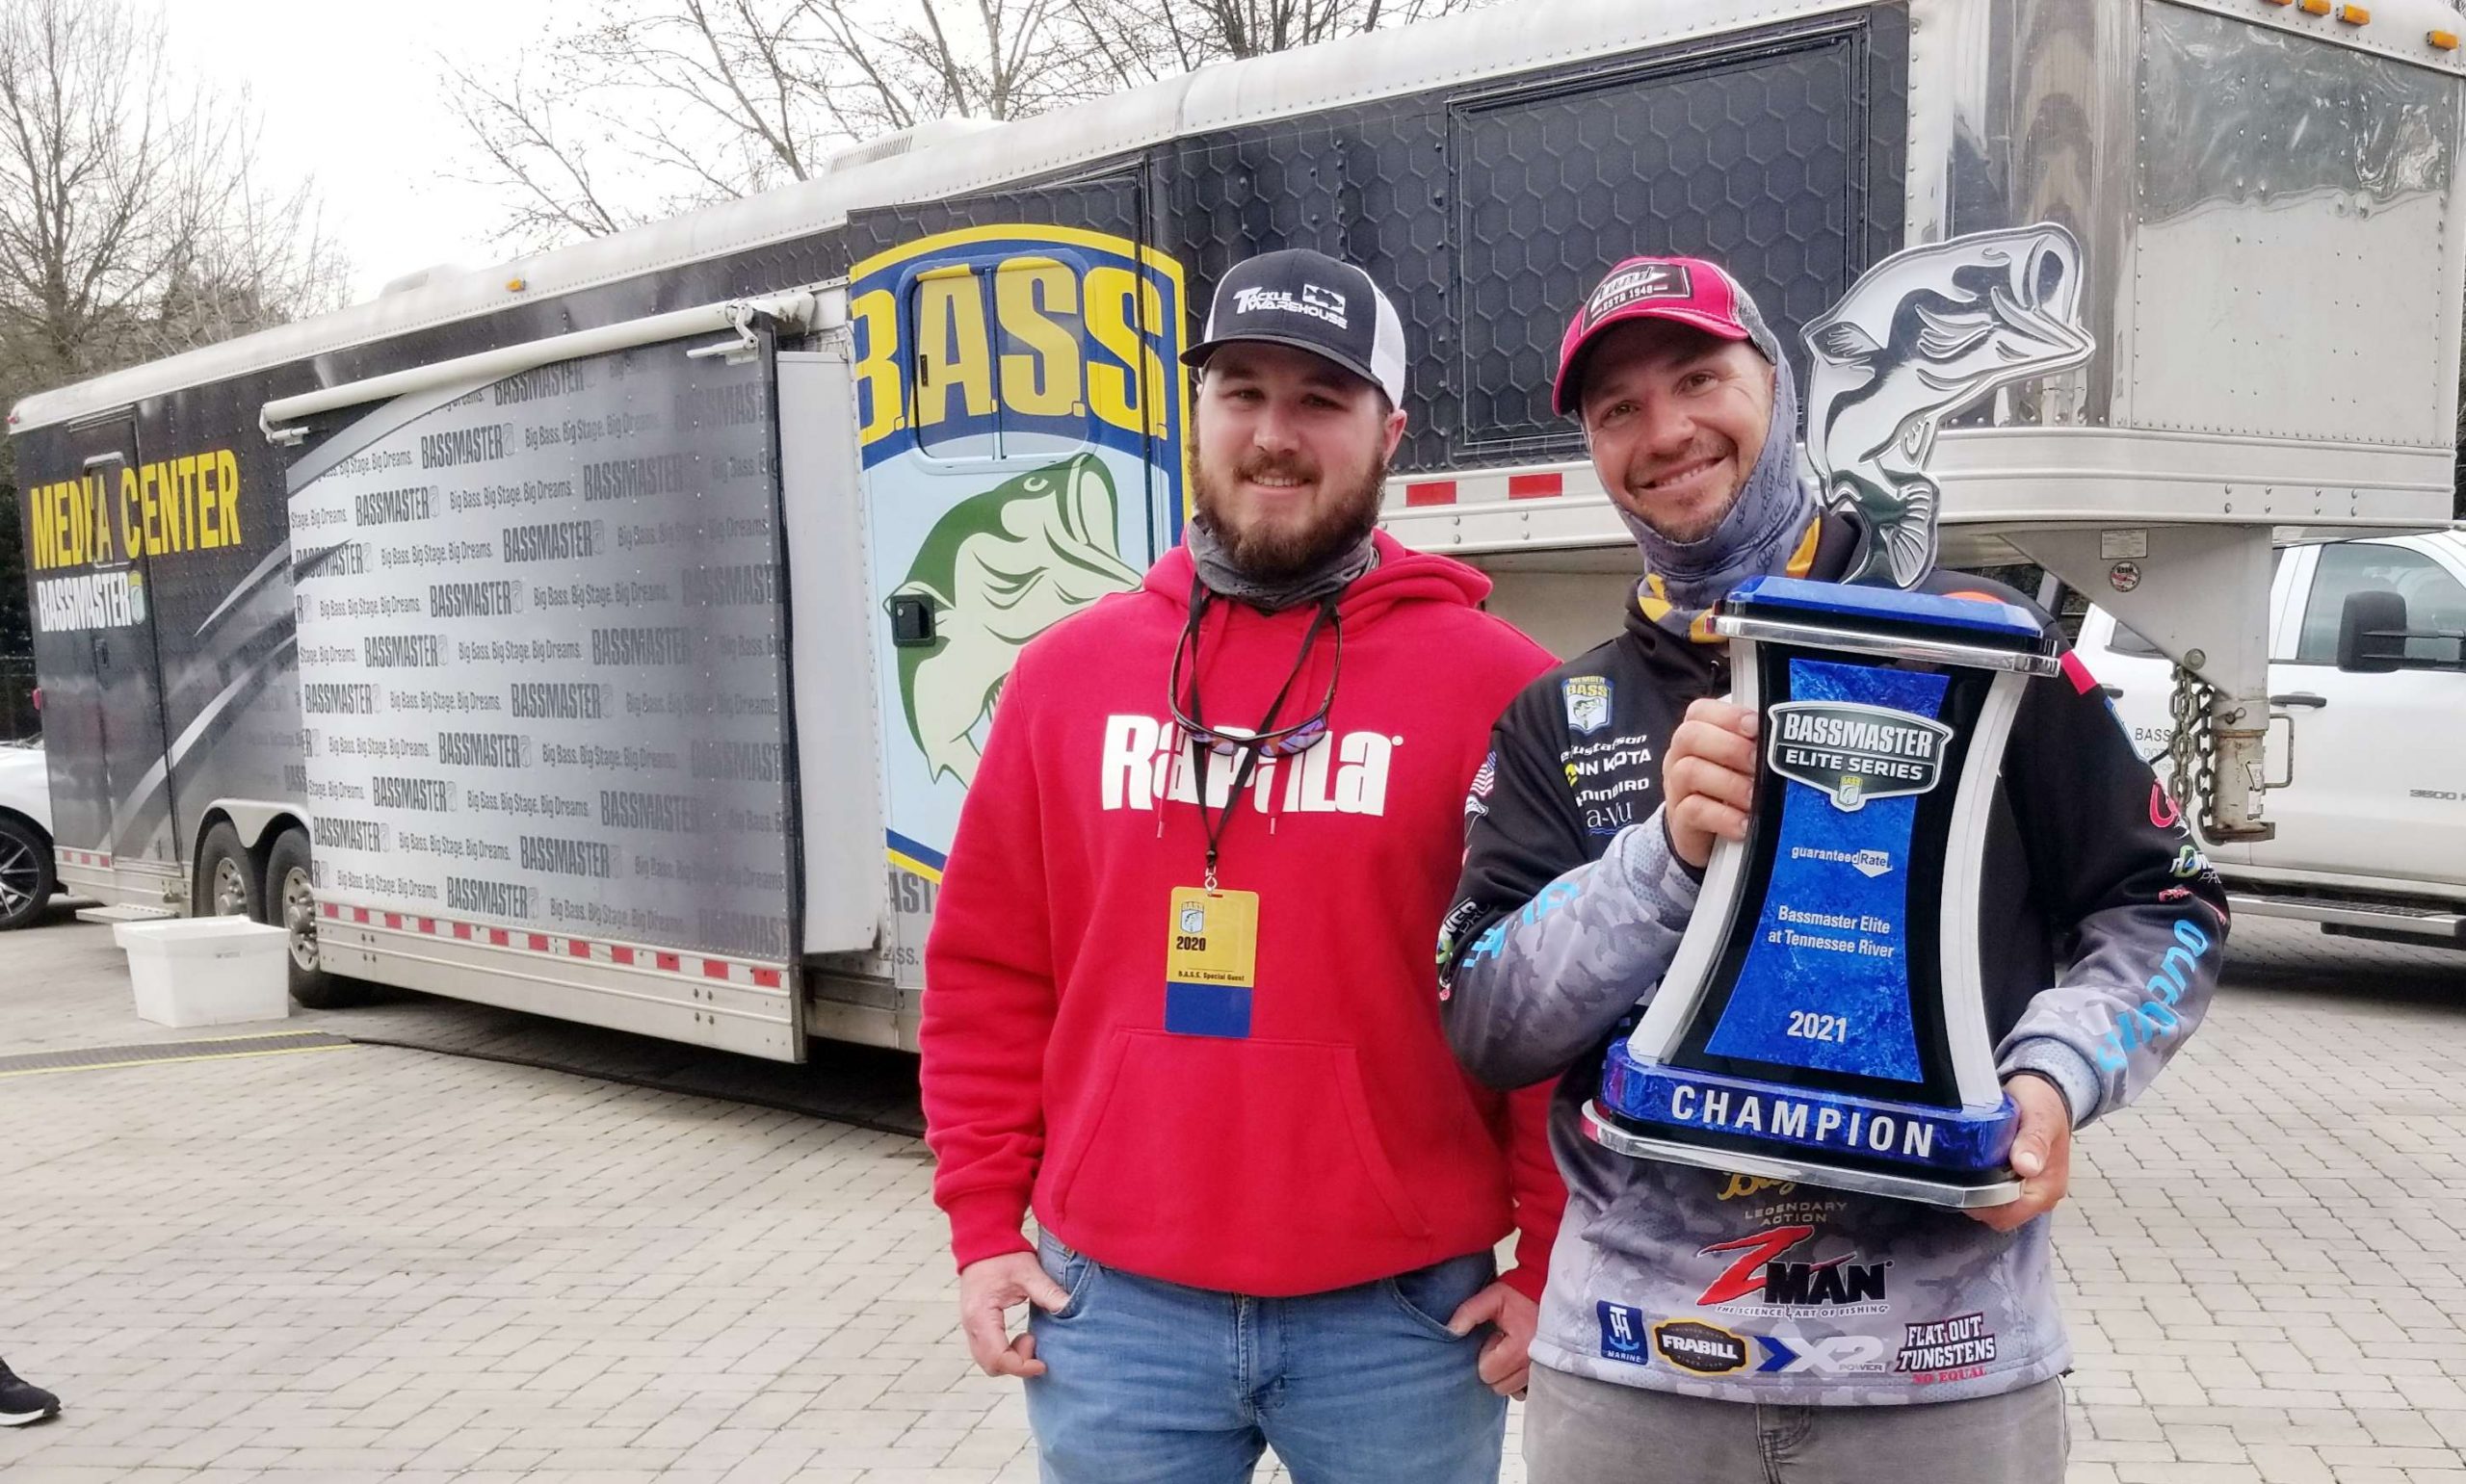 On Championship Sunday, Phillips got a picture taken with Jeff Gustafson after his dominating win. 